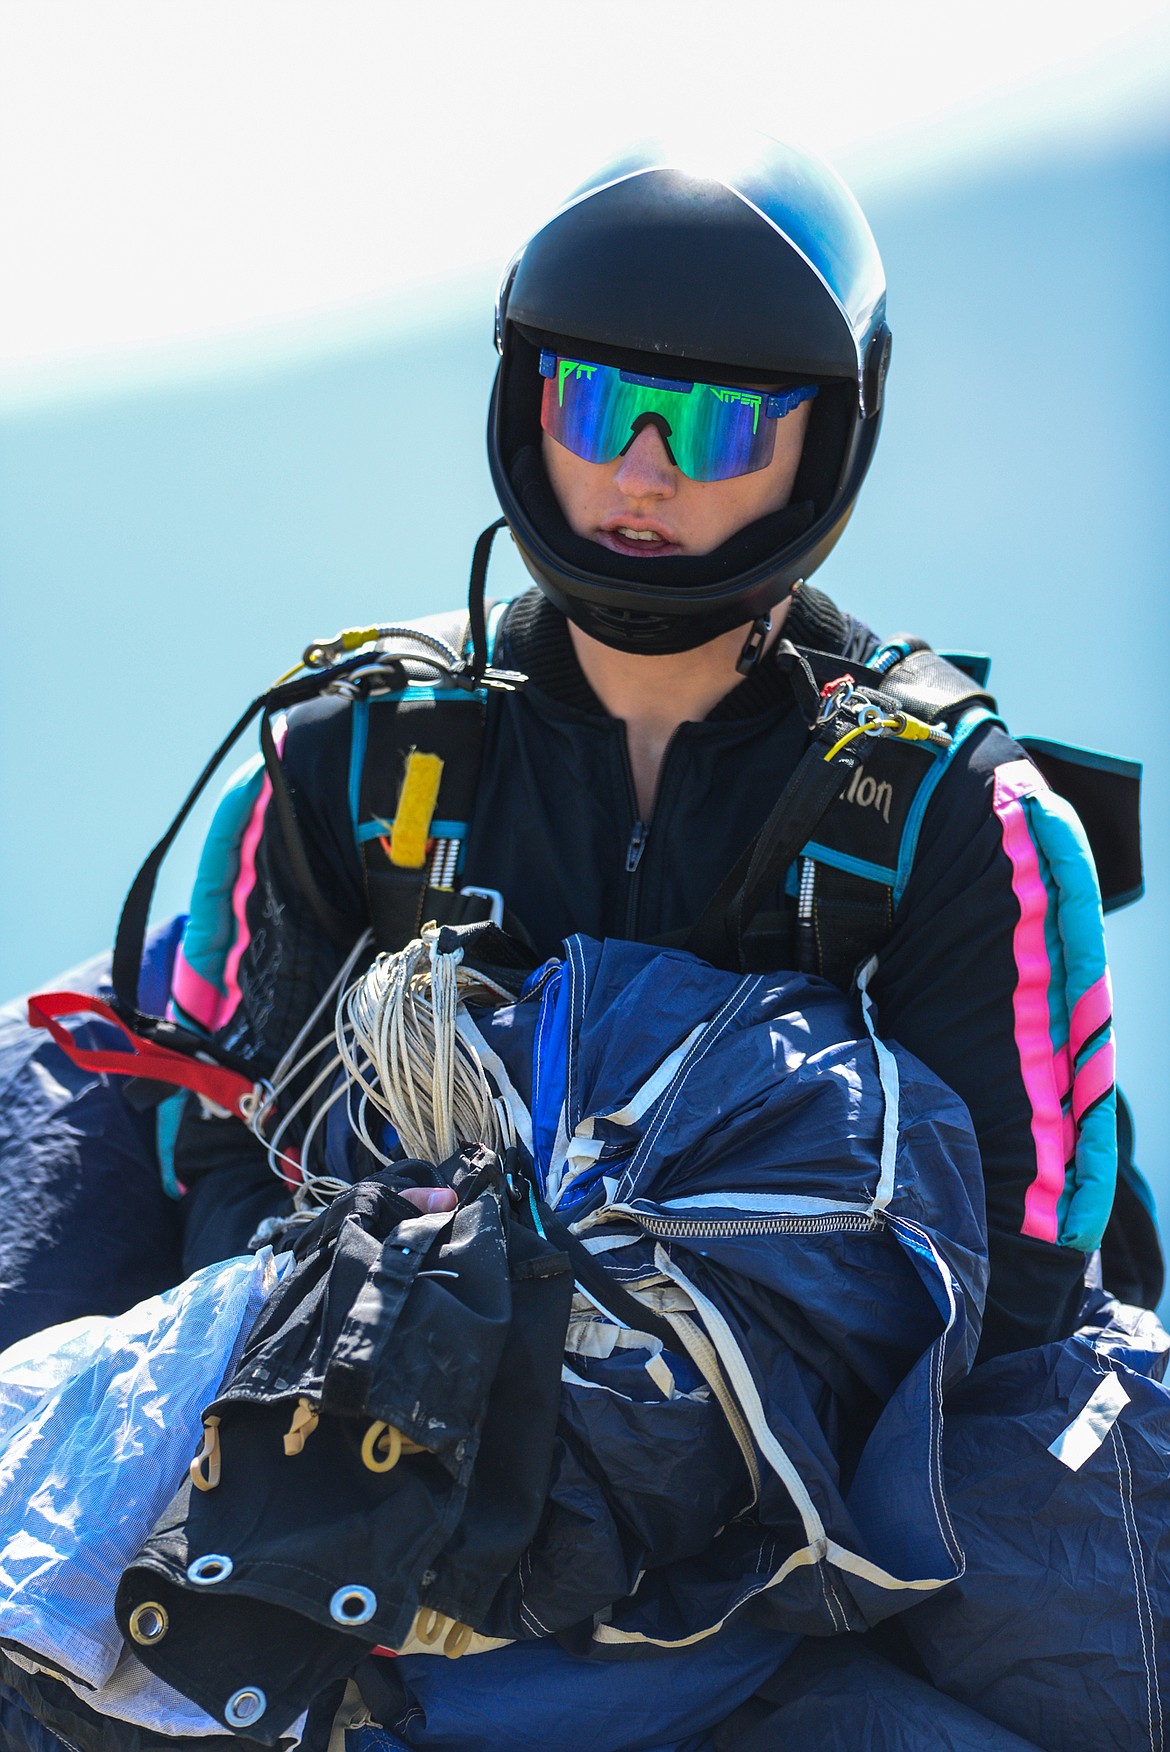 A skydiver carries his parachute and gear after a jump at the 2021 Skydive Lost Prairie Boogie at Meadow Peak Skydiving near Marion on Thursday, Aug. 12, 2021. (Casey Kreider/Daily Inter Lake)